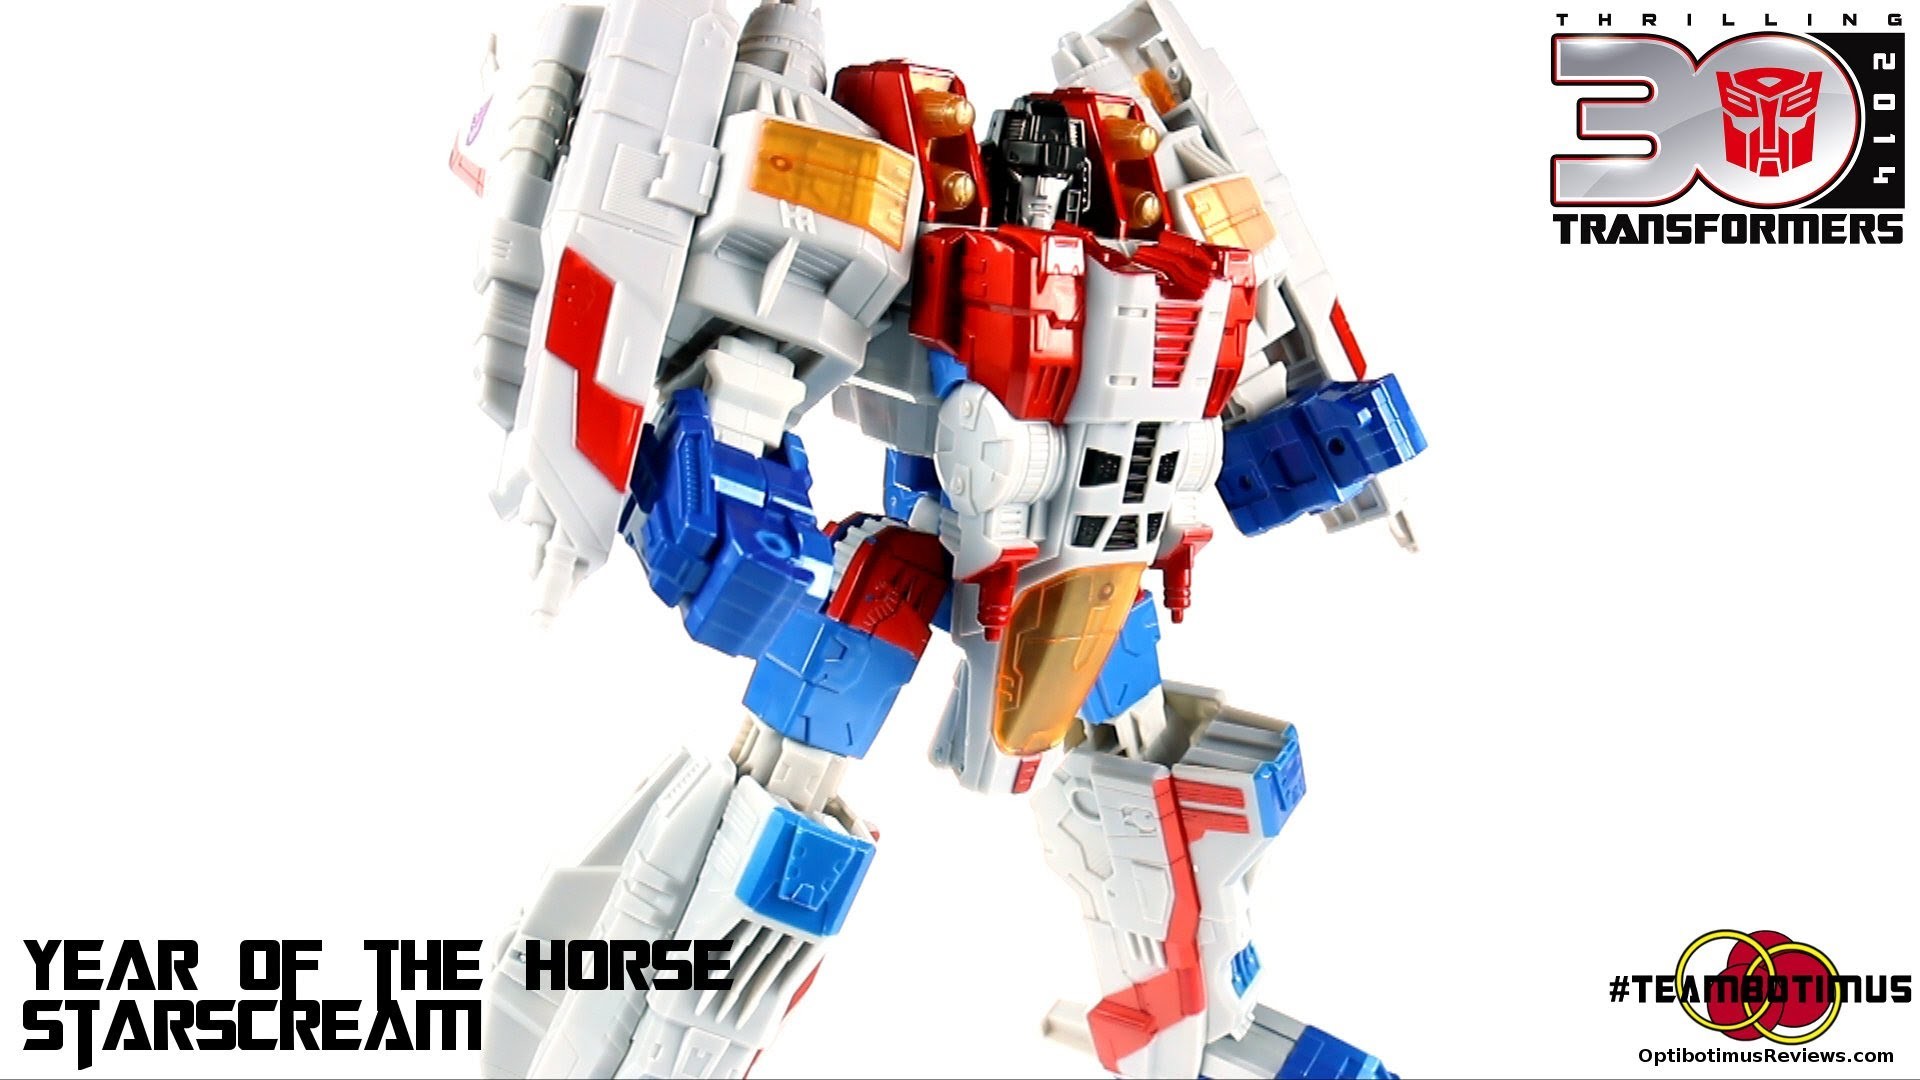 1920x1080 video Review of the Transformers Year of the Horse Starscream